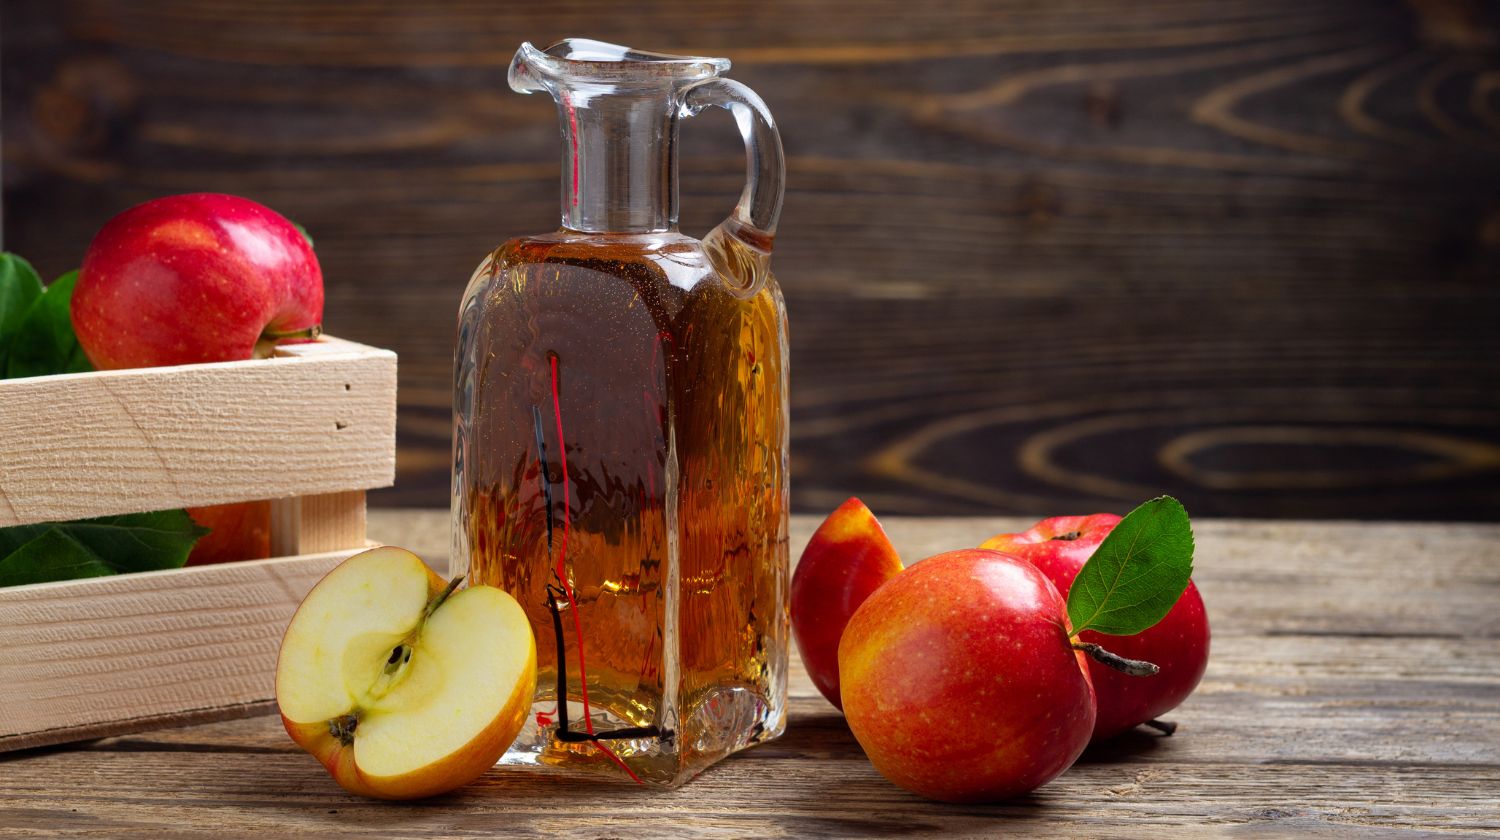 The benefit of apple cider vinegar and honey